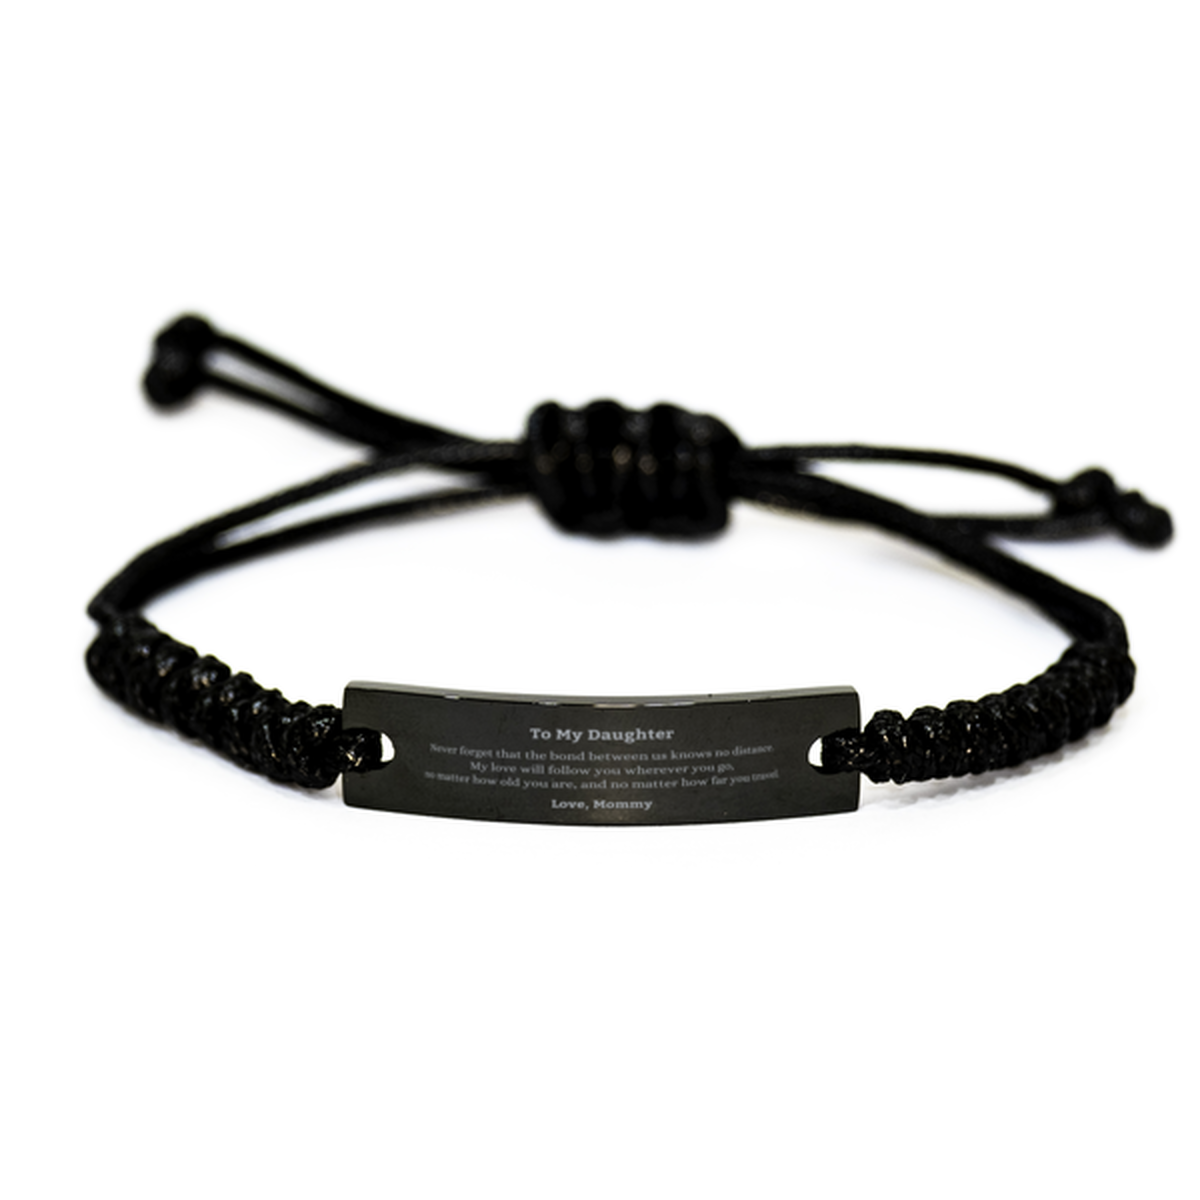 Daughter Birthday Gifts from Mommy, Adjustable Black Rope Bracelet for Daughter Christmas Graduation Unique Gifts Daughter Never forget that the bond between us knows no distance. Love, Mommy